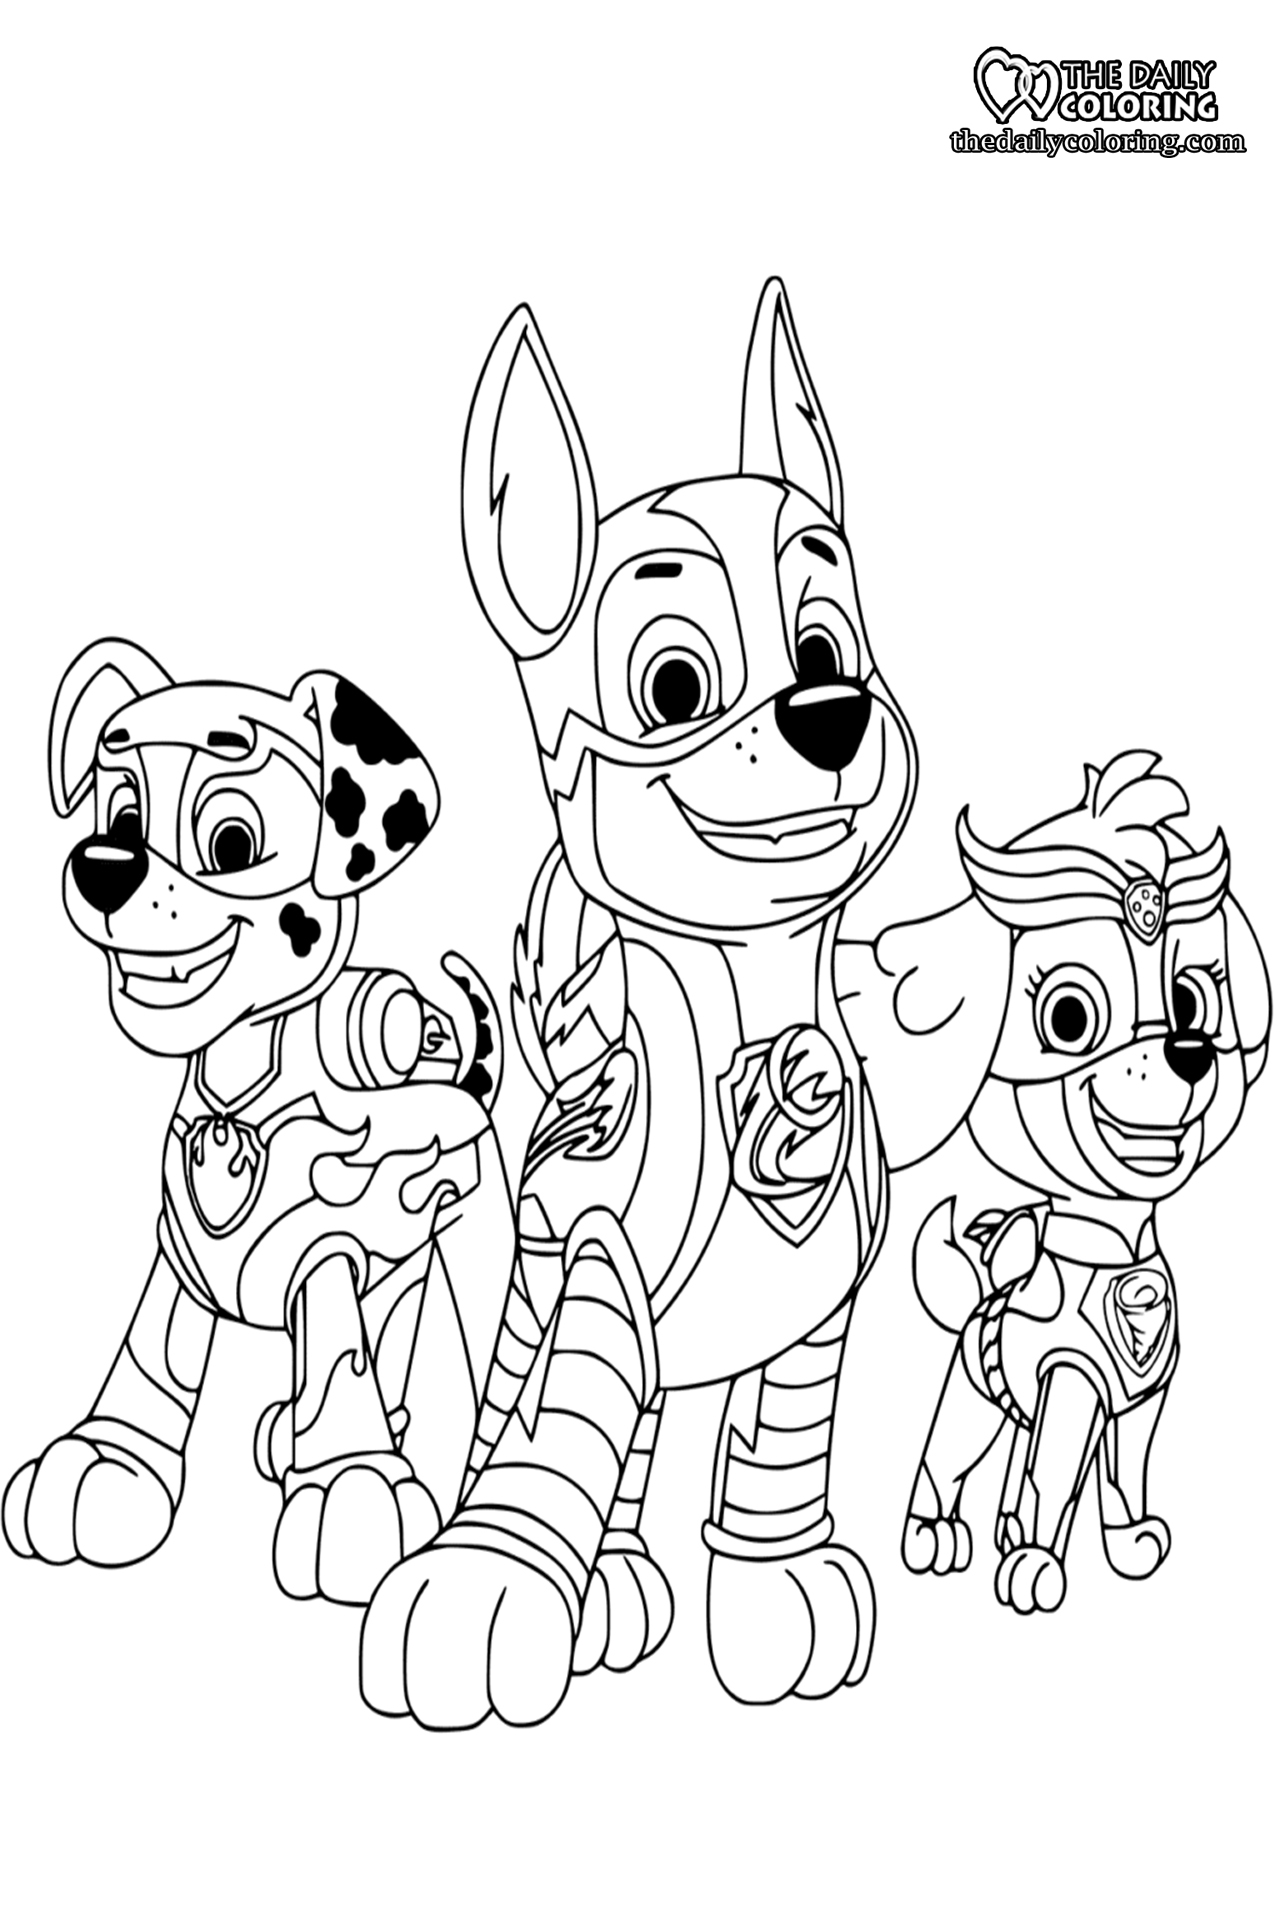 Free Printable Paw Patrol Coloring Pages [New] - The Daily Coloring